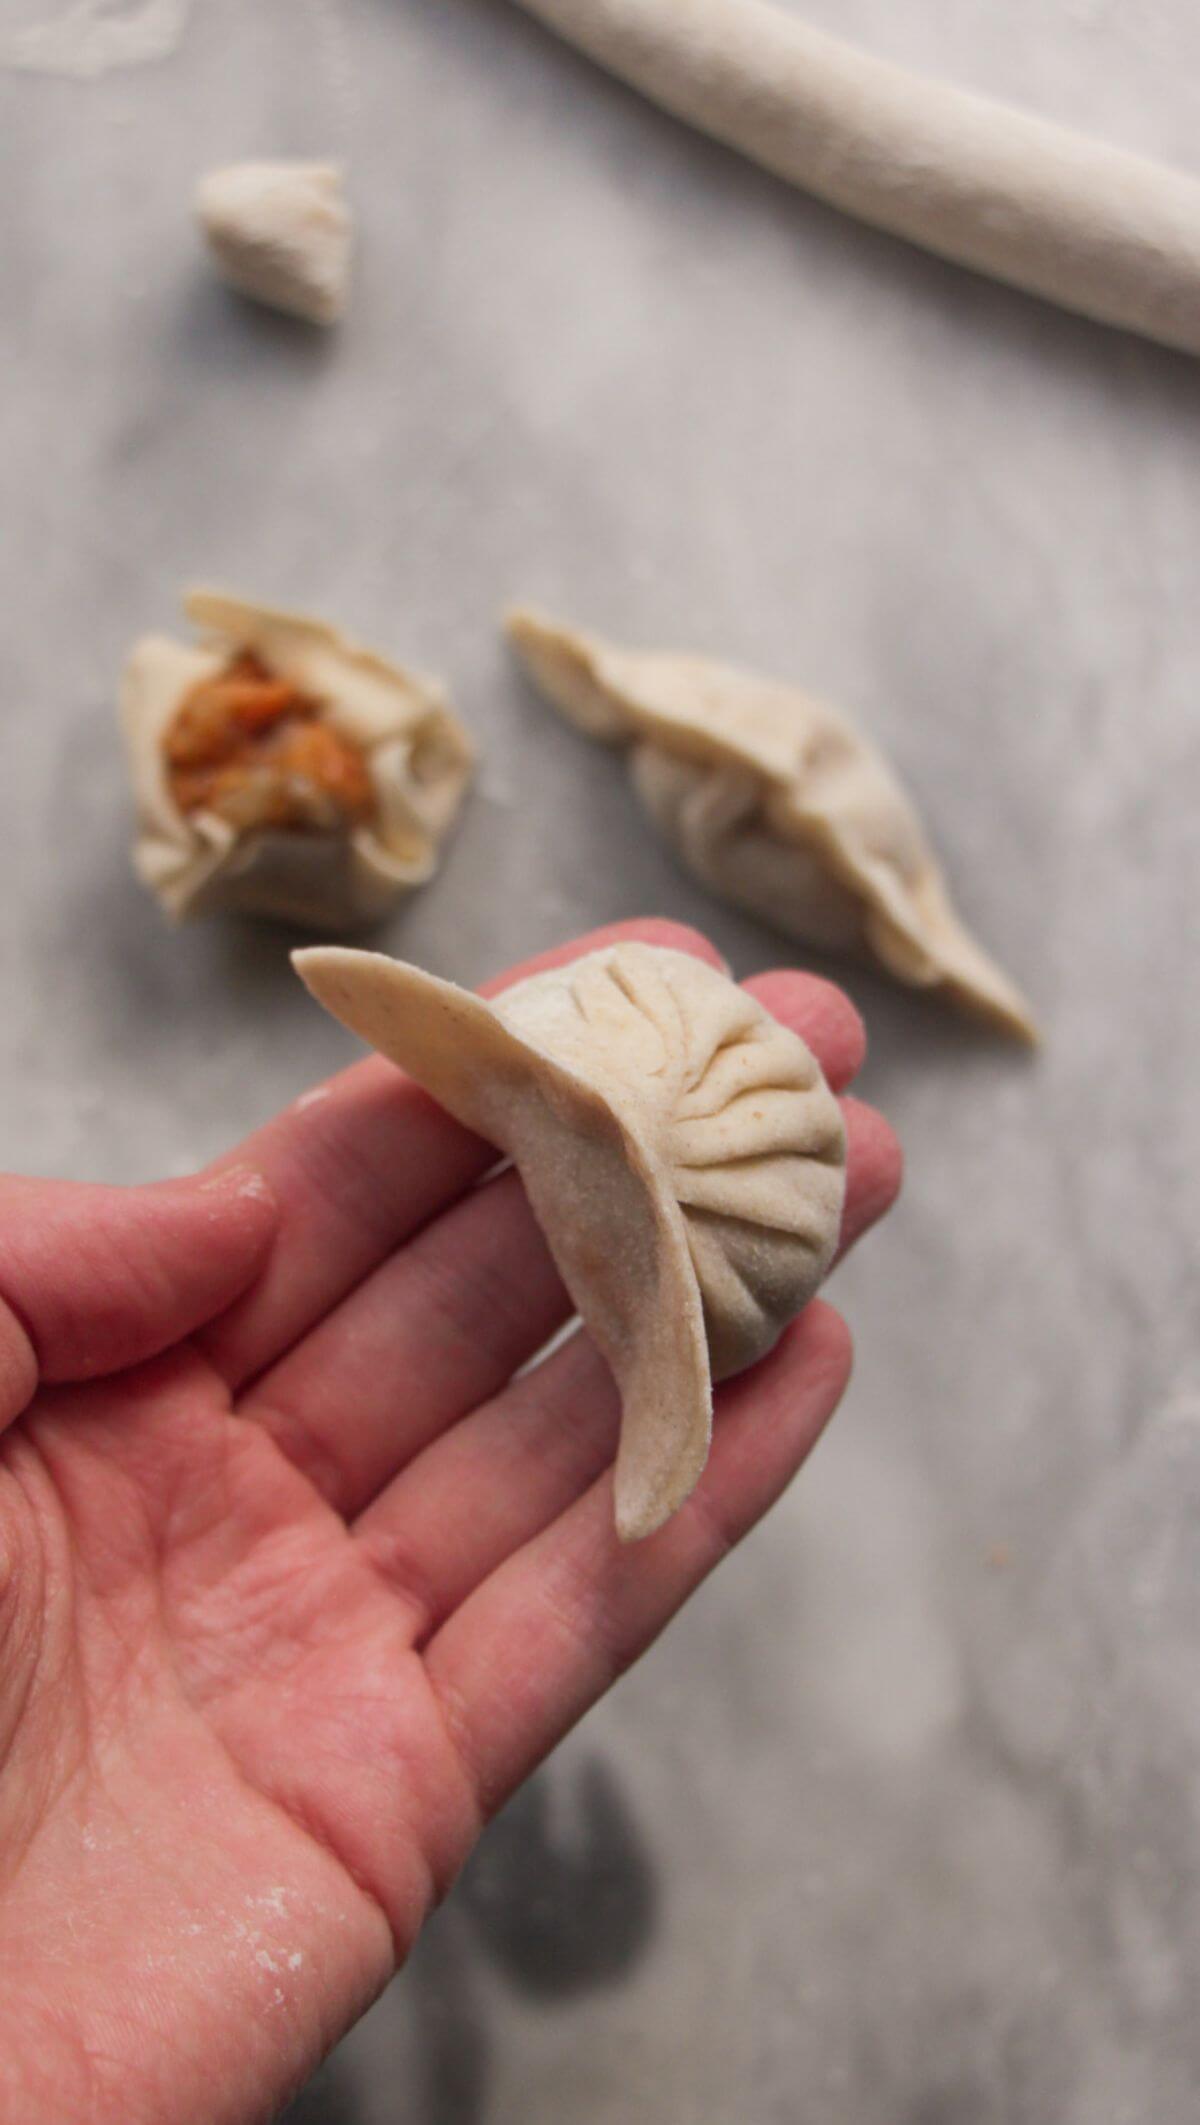 Hand holding a pleated dumpling with two other dumplings in the background.